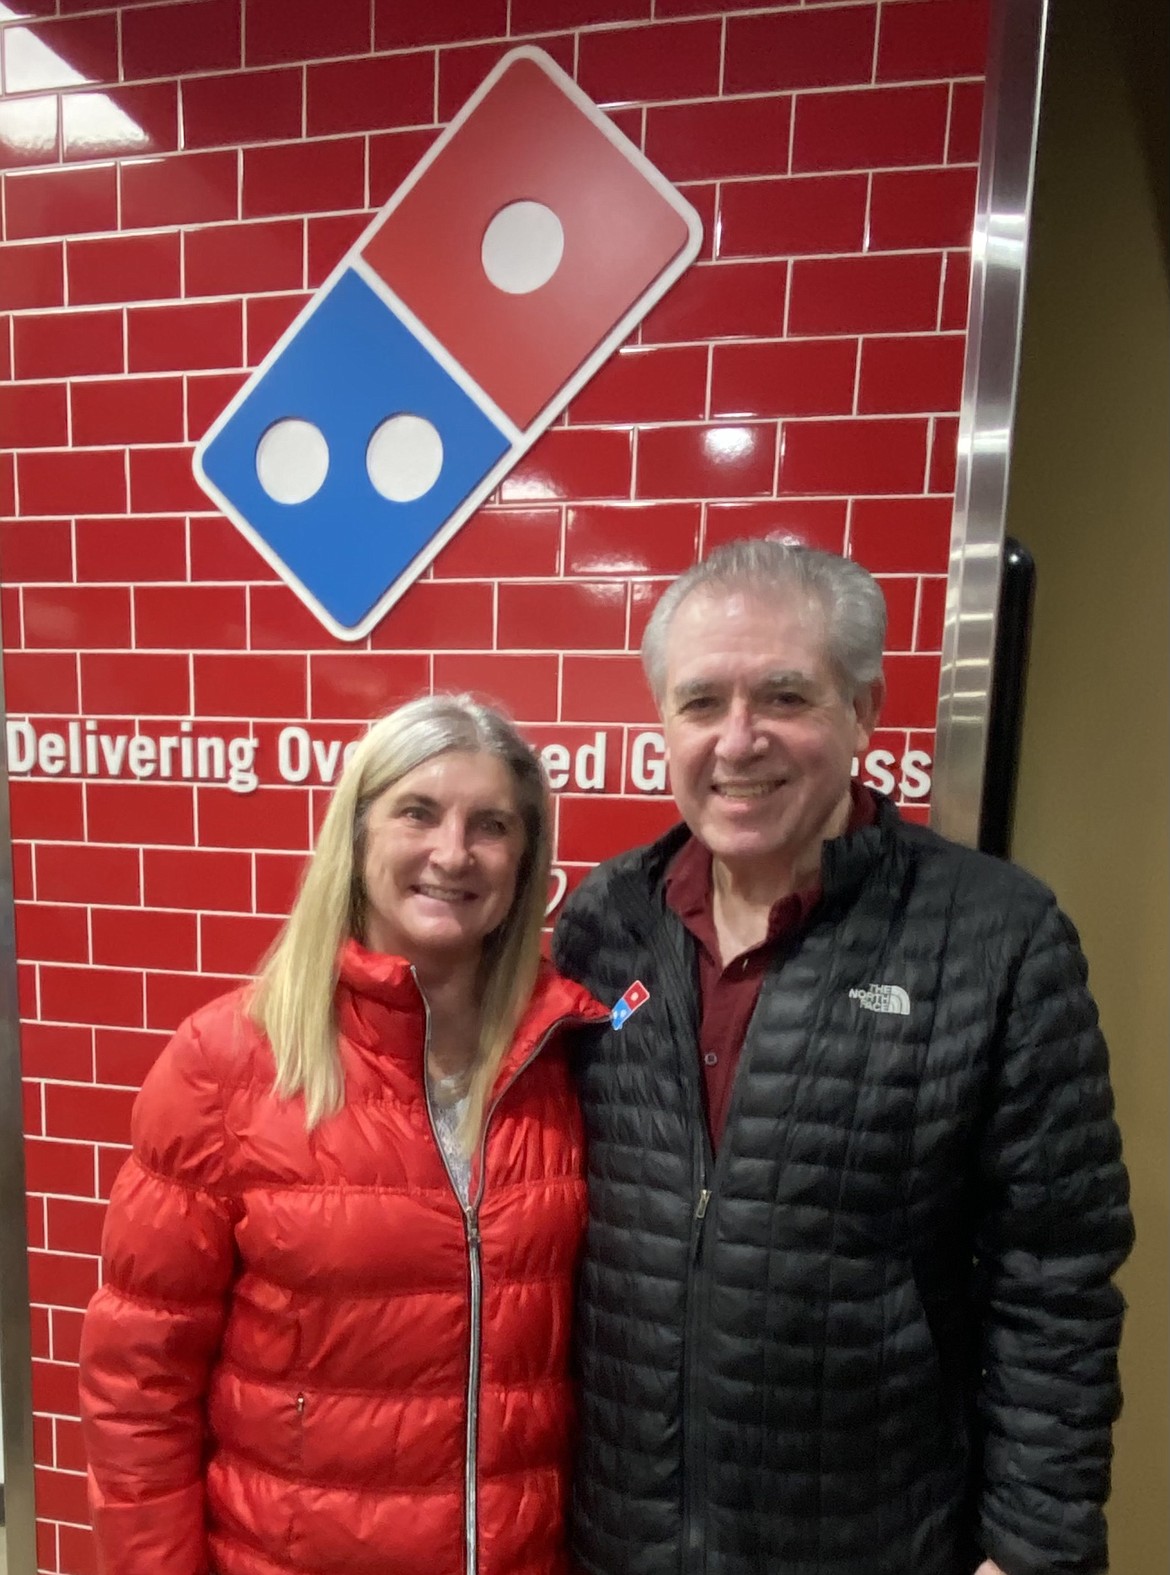 Missy and Jim Hightower operate five Domino’s locations in Coeur d'Alene, Post Falls, Rathdrum, Hayden and now Kellogg.